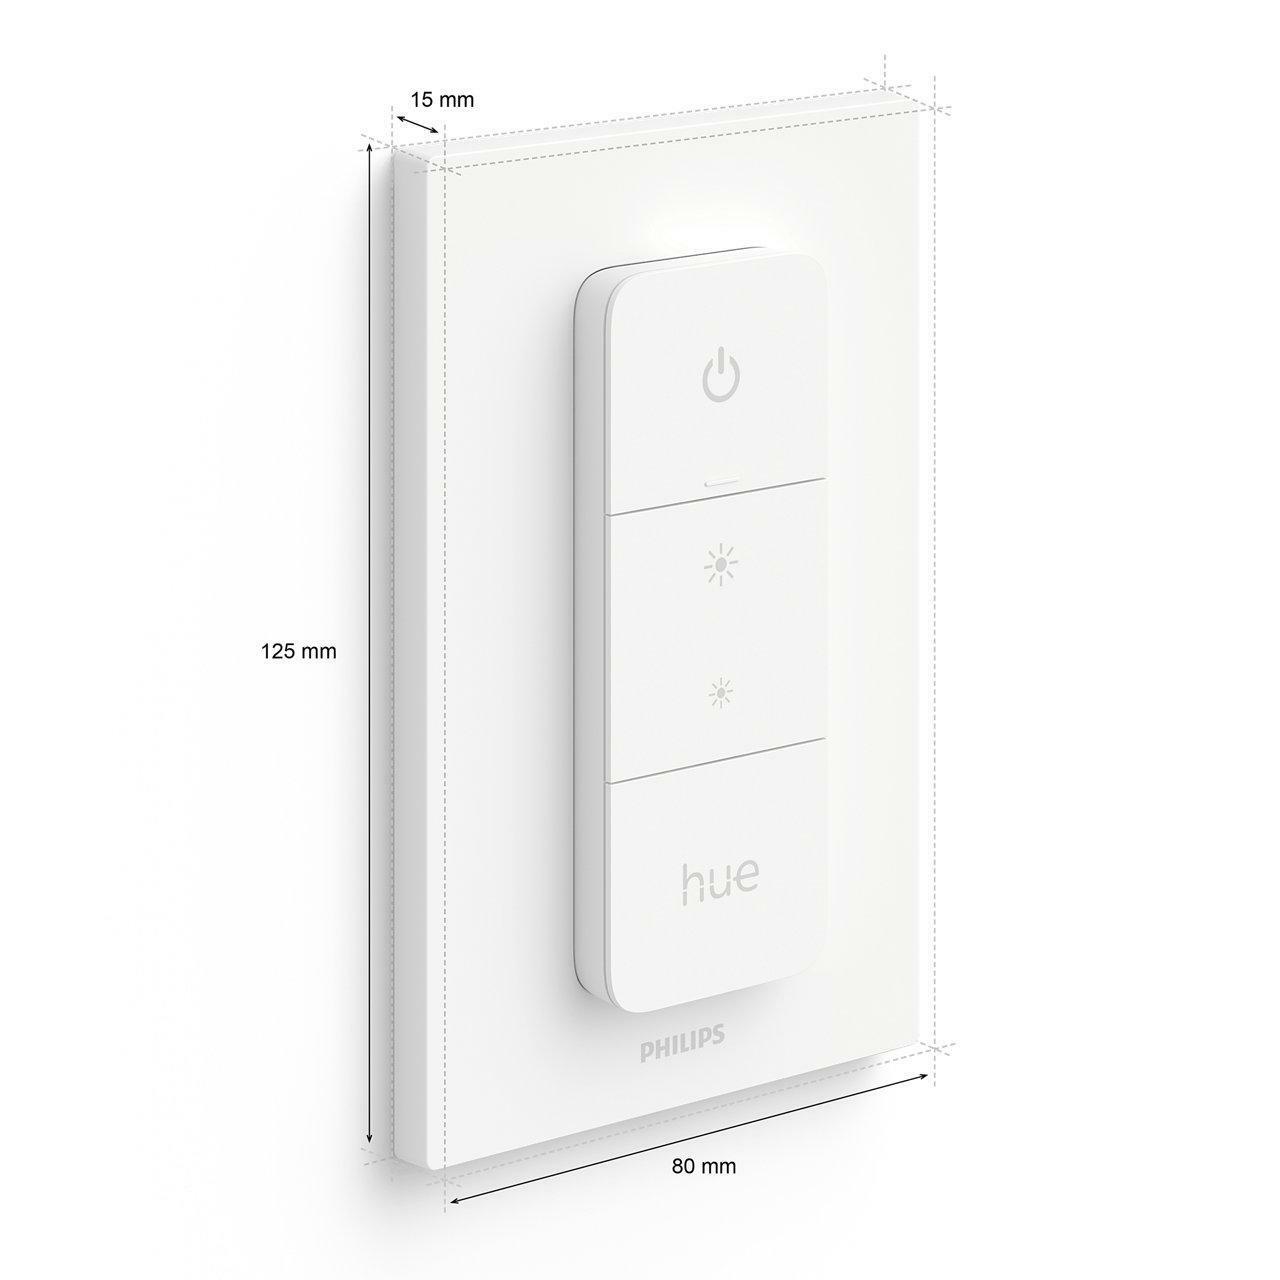 philips hue philips hue dimmer switch wifi a batteria bianco 929002398602 27461700